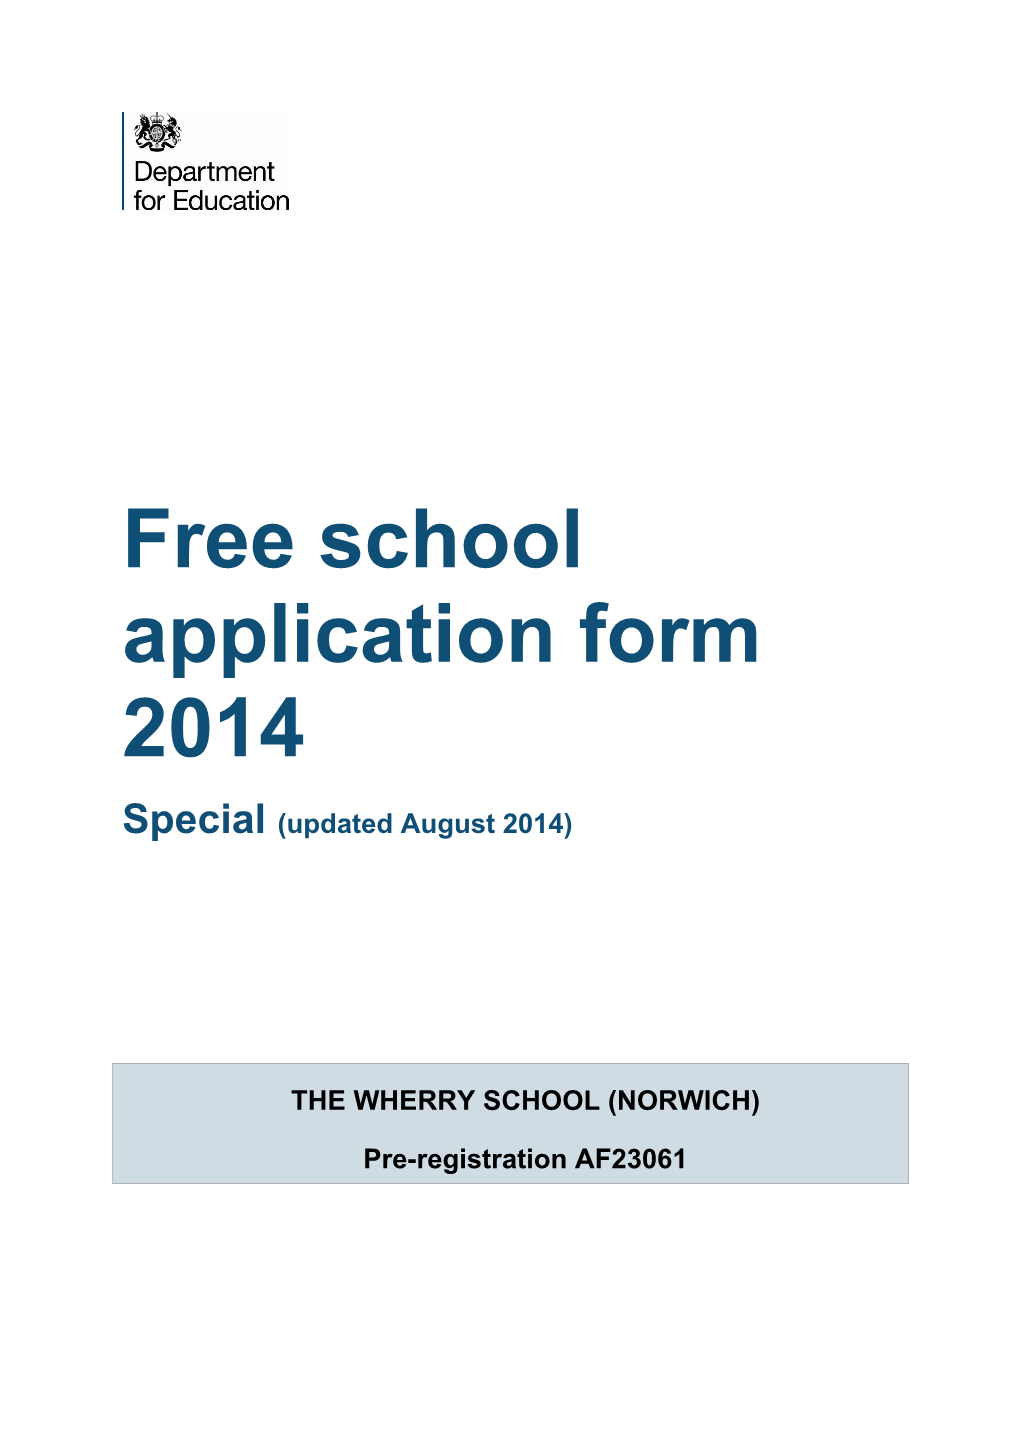 Free School Application Form 2014 Special (Updated August 2014)